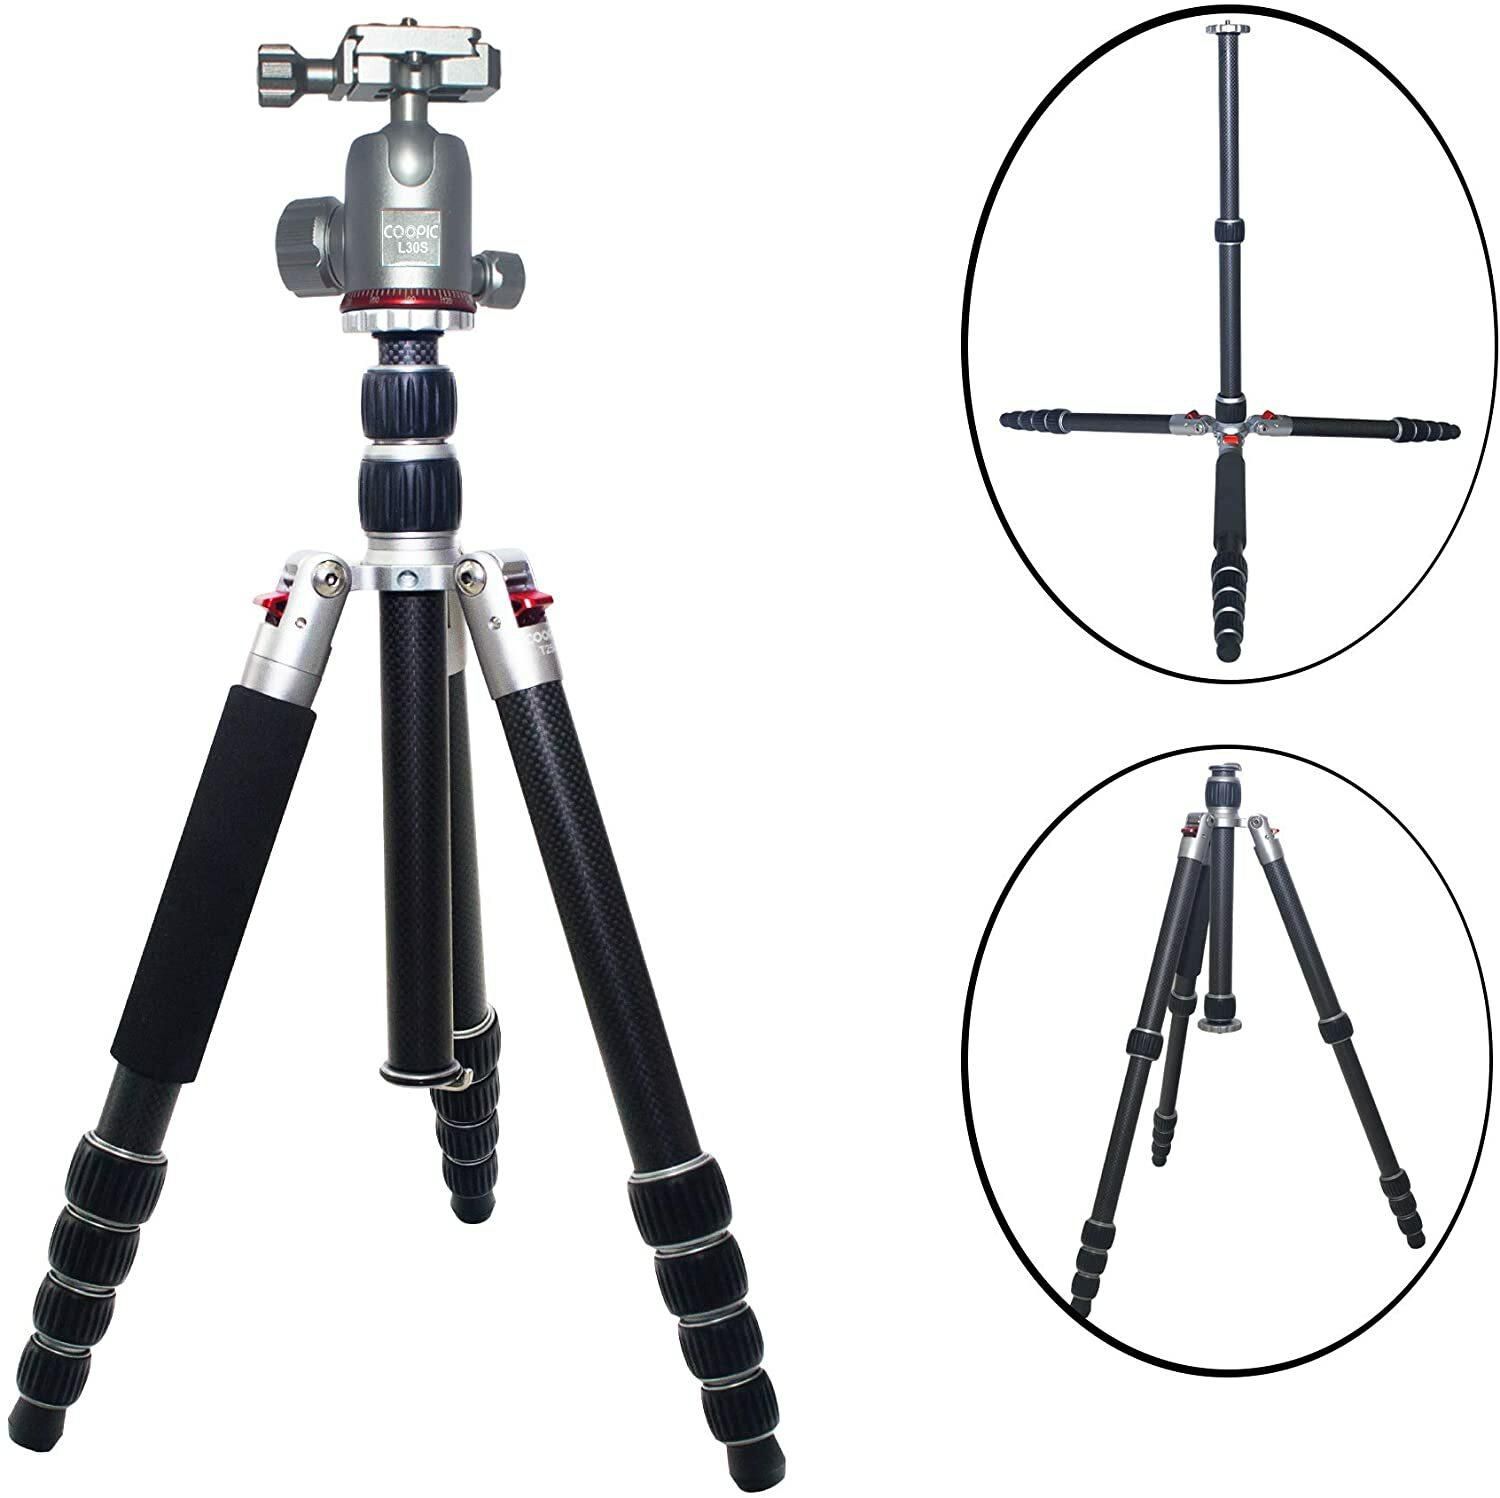 Coopic T-25C+L30S Carbon Fiber 3 In 1 Tripod Monopod Ball Head Max 63 Inch/160 cm With Fluid Metal Ball Video Head 1/4-Inch Quick Shoe Plate And Bag For DSLR Camera Video Camcorder Load Up To 15 Kg